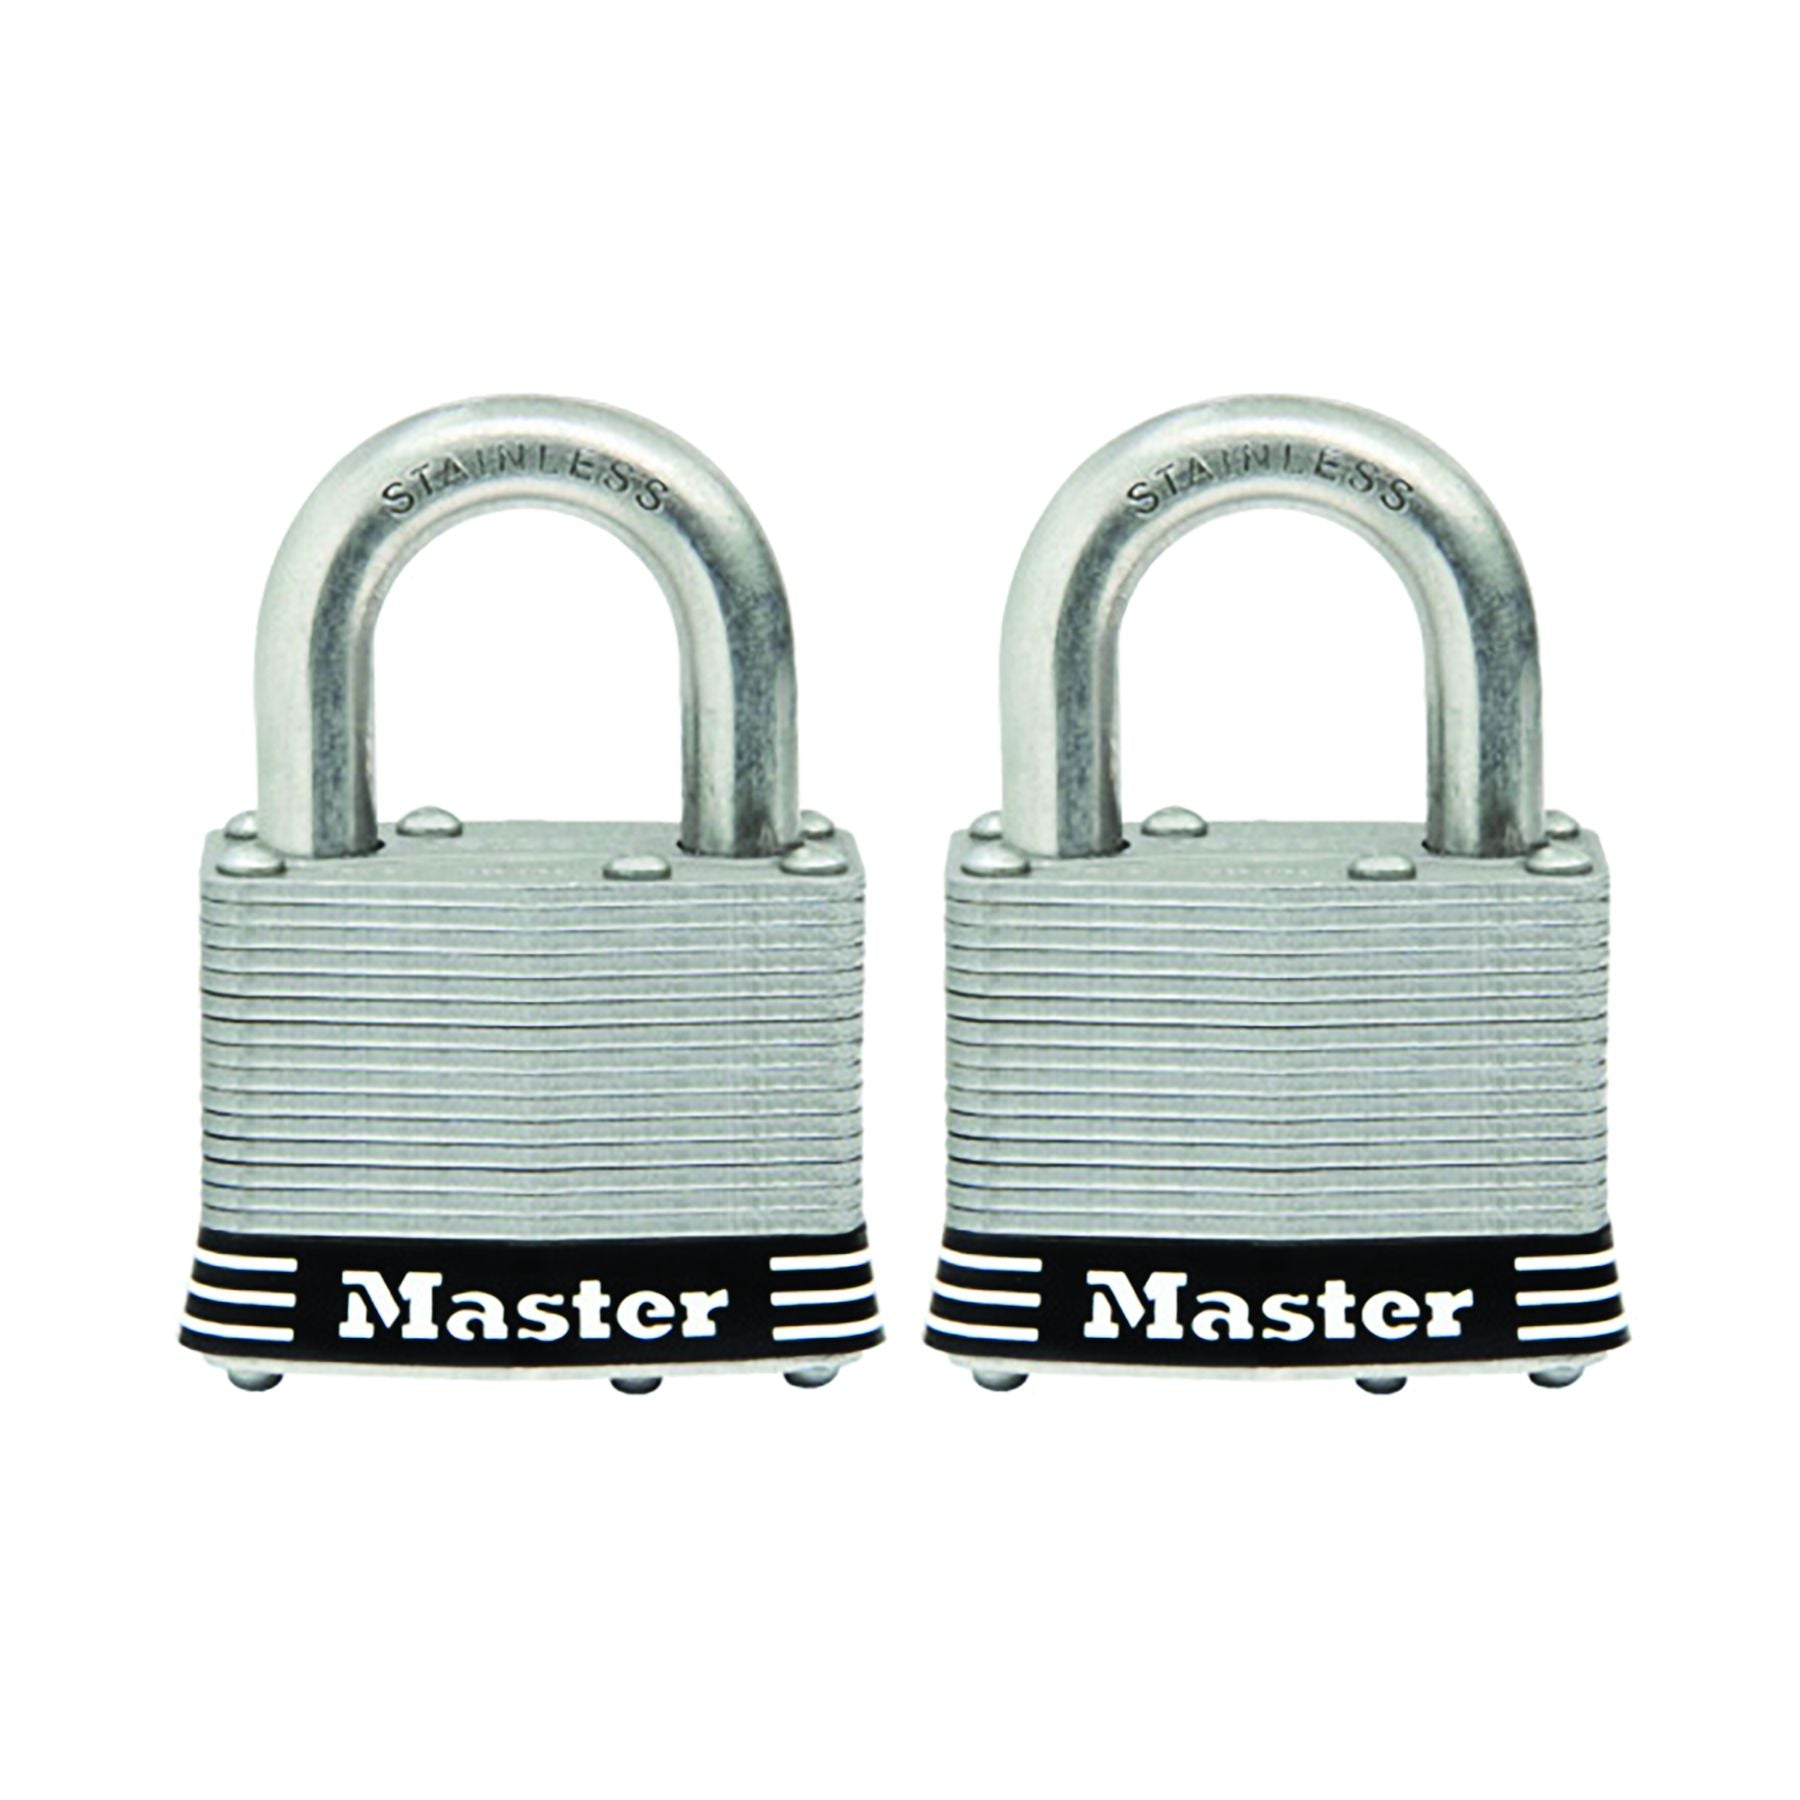 LAMINATED STAINLESS STEEL PADLOCK 2" x 1" - PACK OF 2